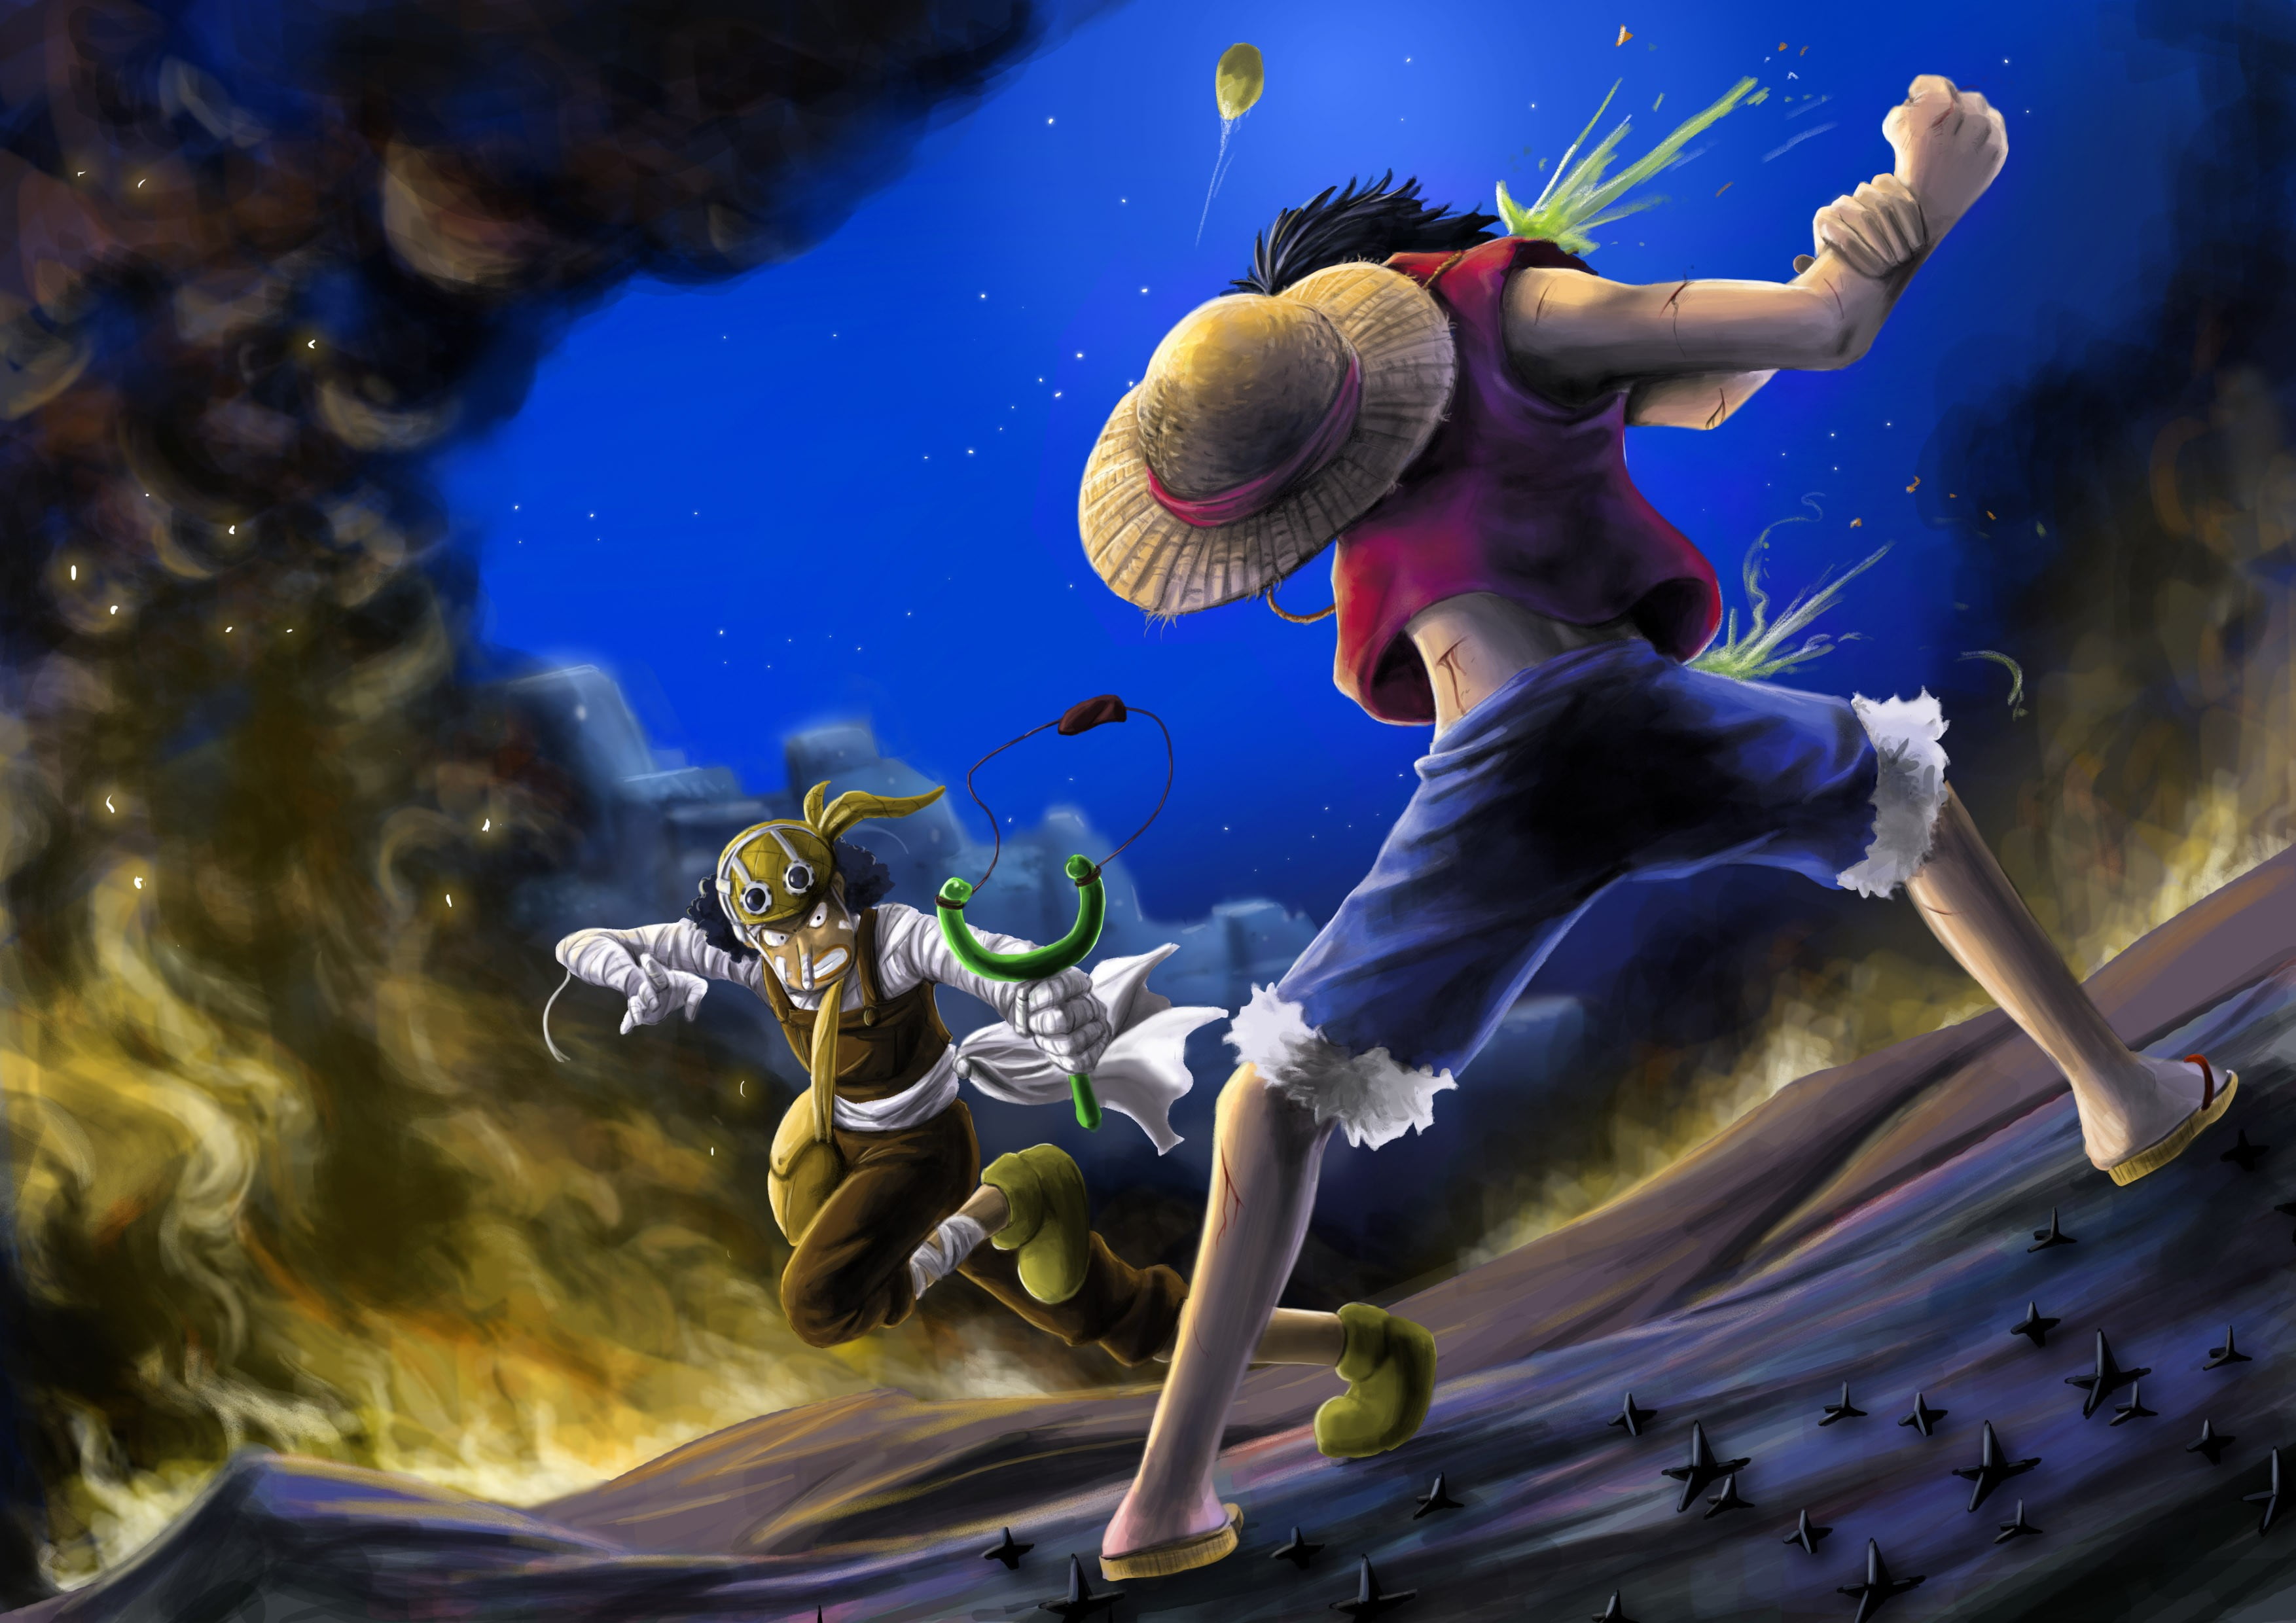 One Piece Luffy and Usupp anime digital wallpaper, One Piece, Monkey D. Luf...